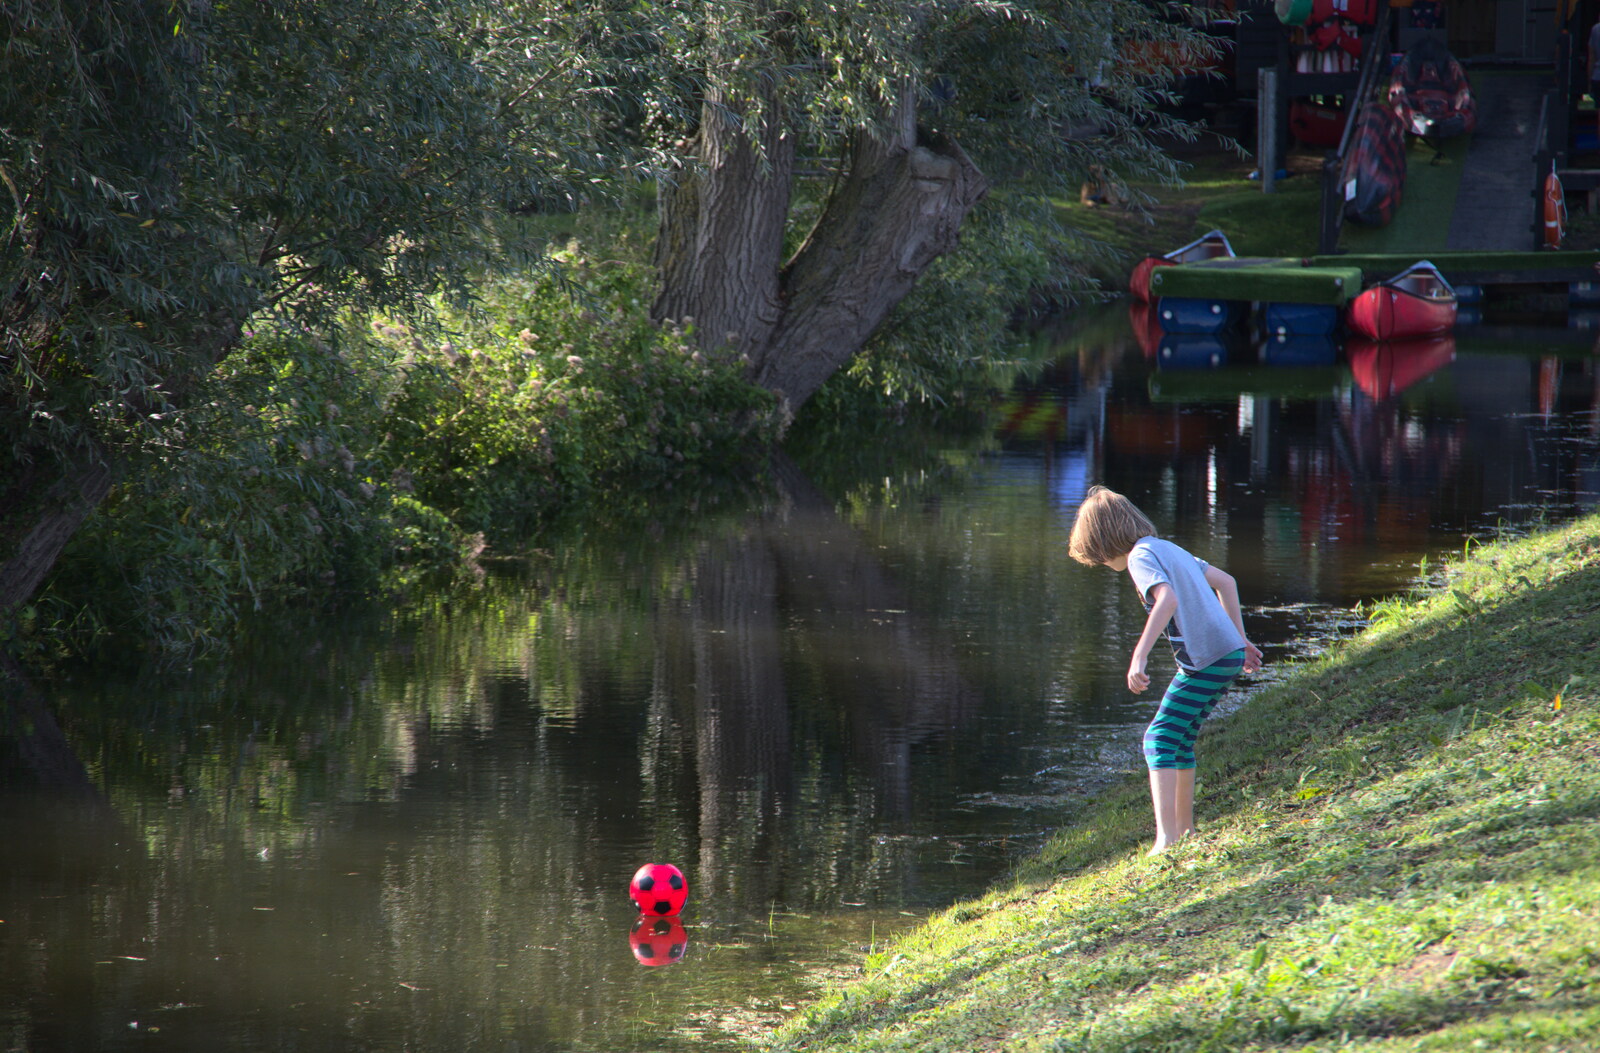 Camping at Three Rivers, Geldeston, Norfolk - 5th September 2020: Benson loses his ball in the river